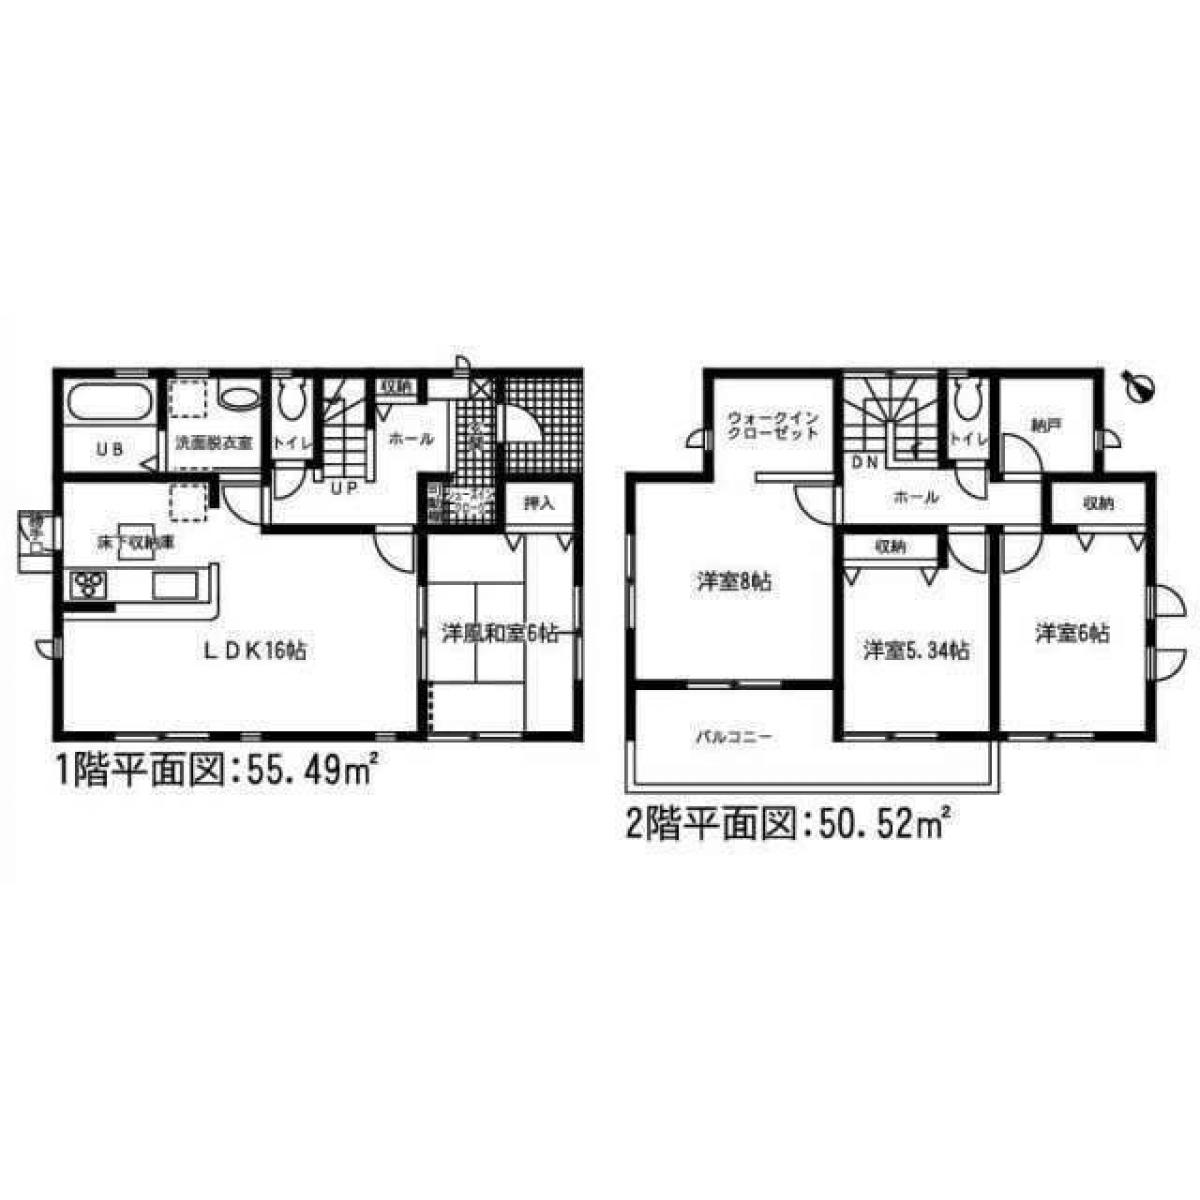 Picture of Home For Sale in Hekinan Shi, Aichi, Japan